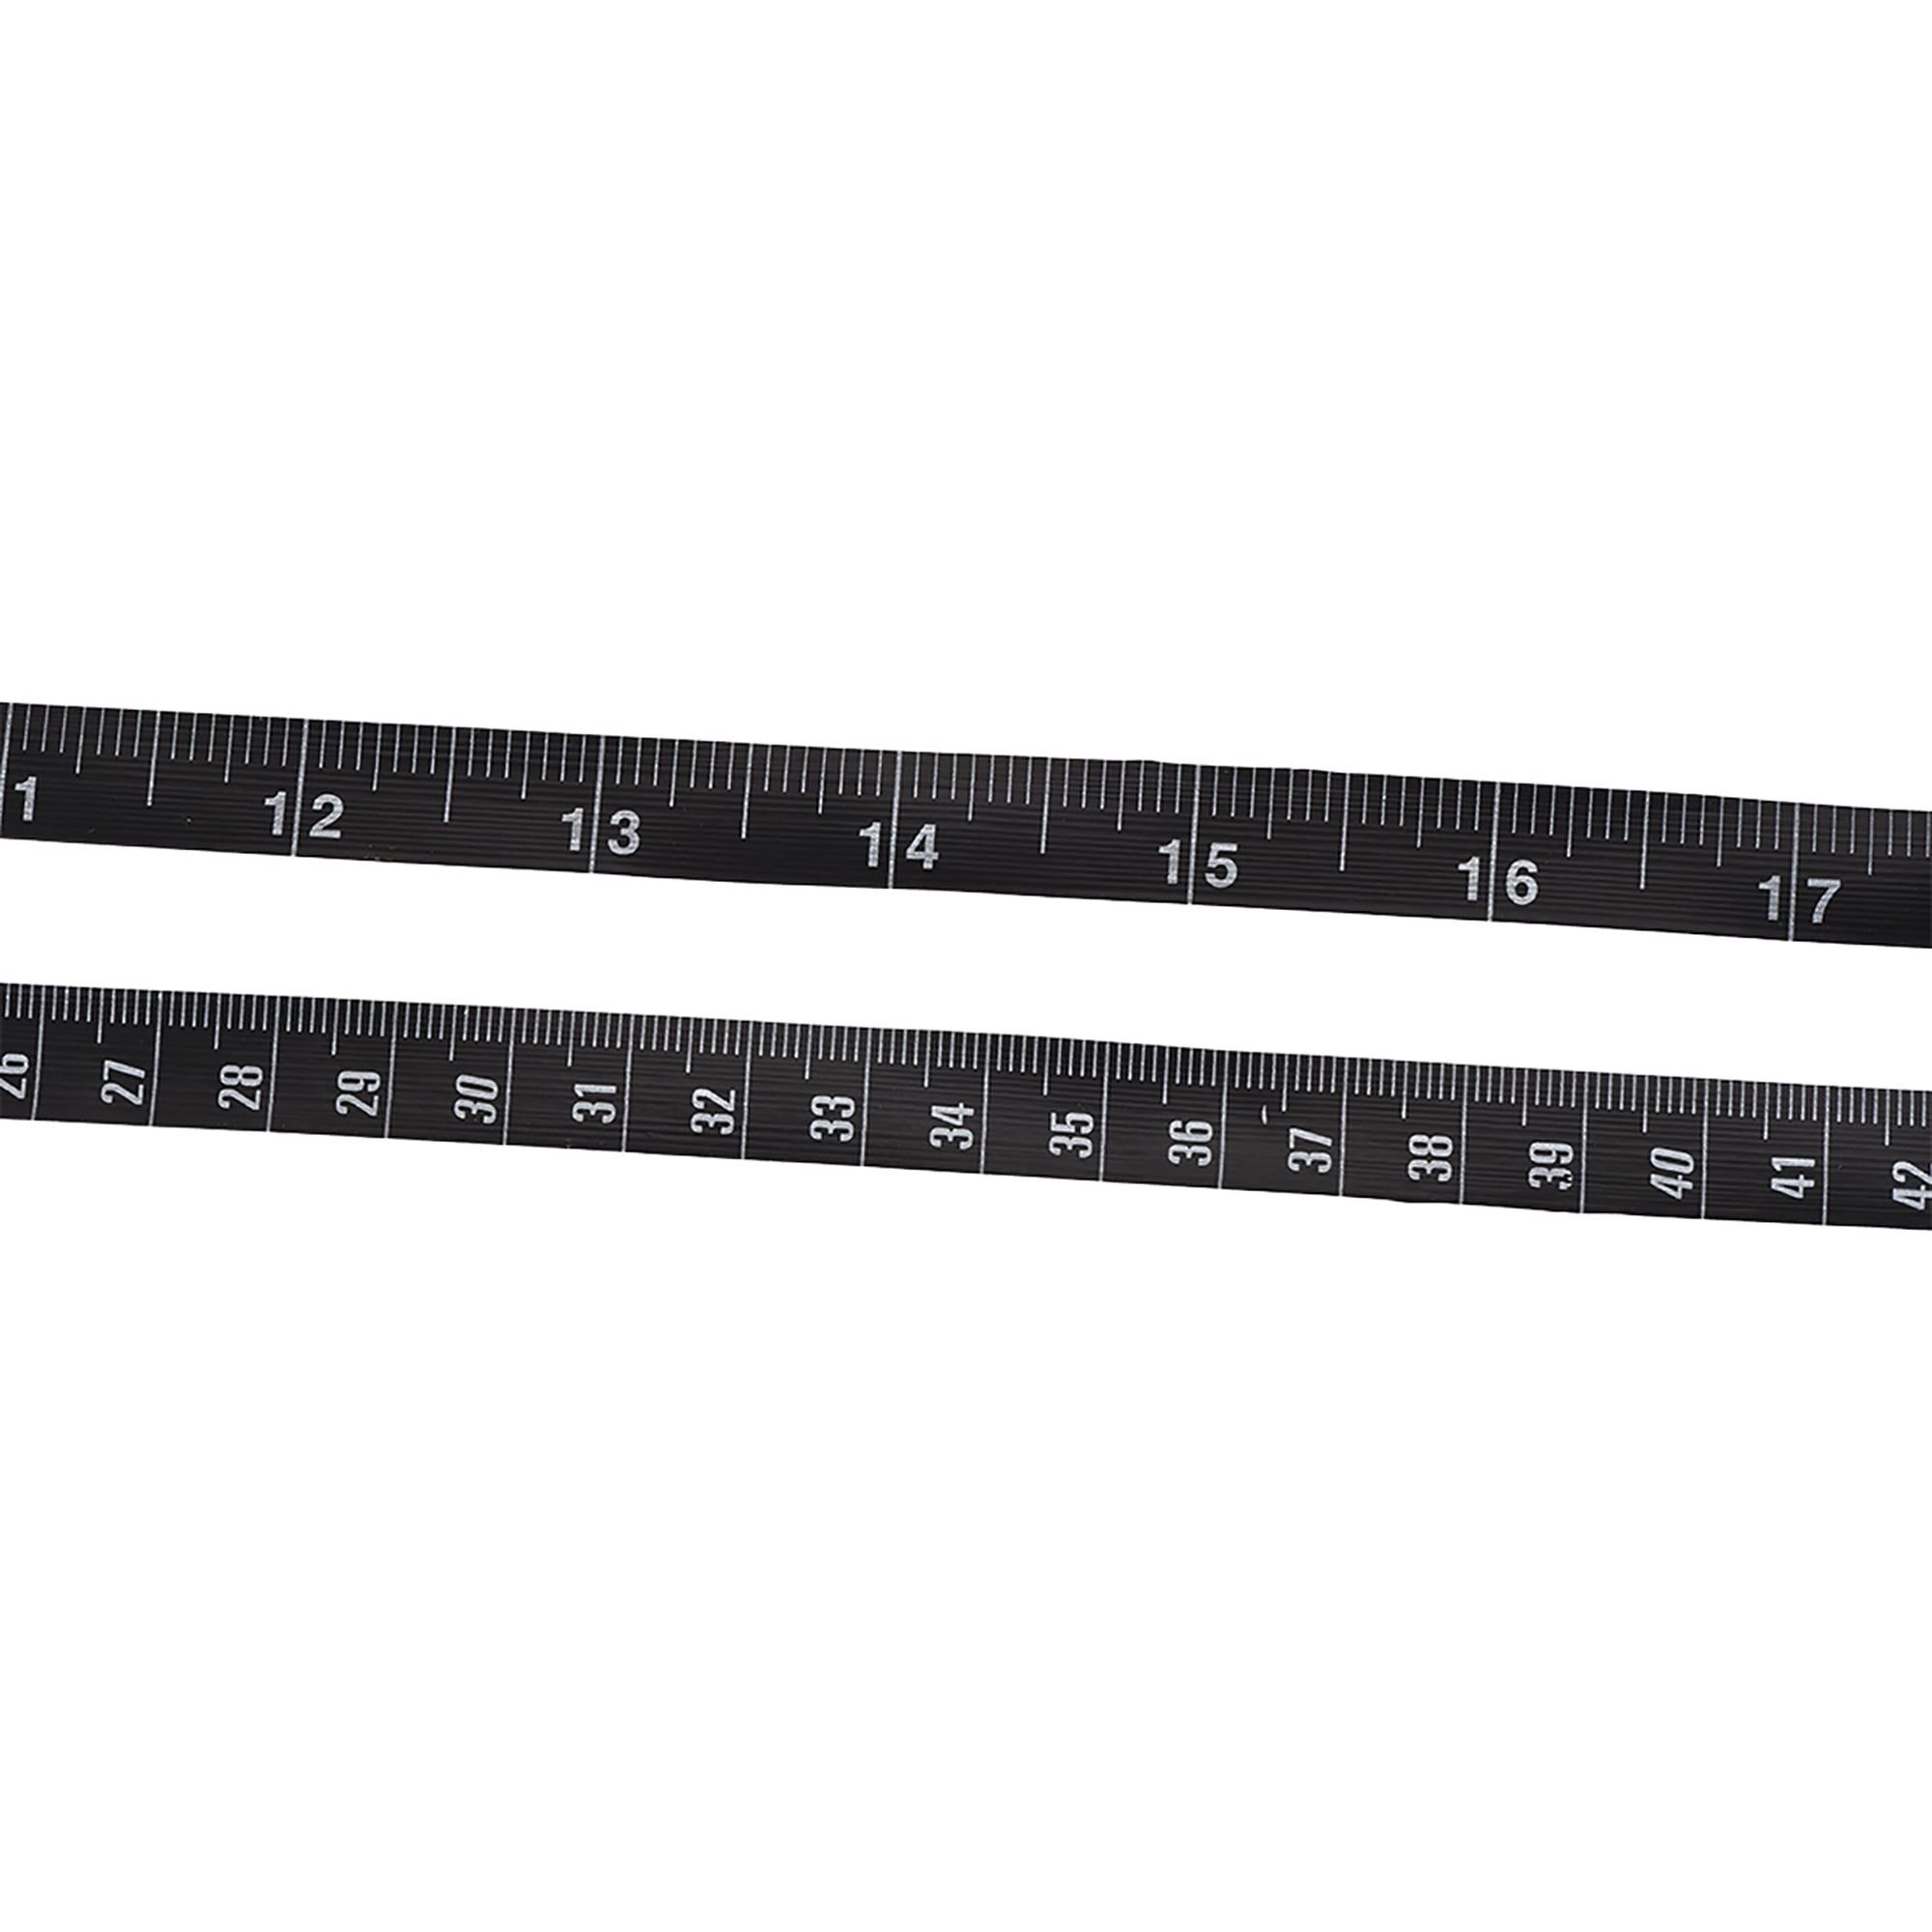 Unique Bargains 60-Inch Inch/Metric Tape Measure Tailor Sewing Cloth Ruler